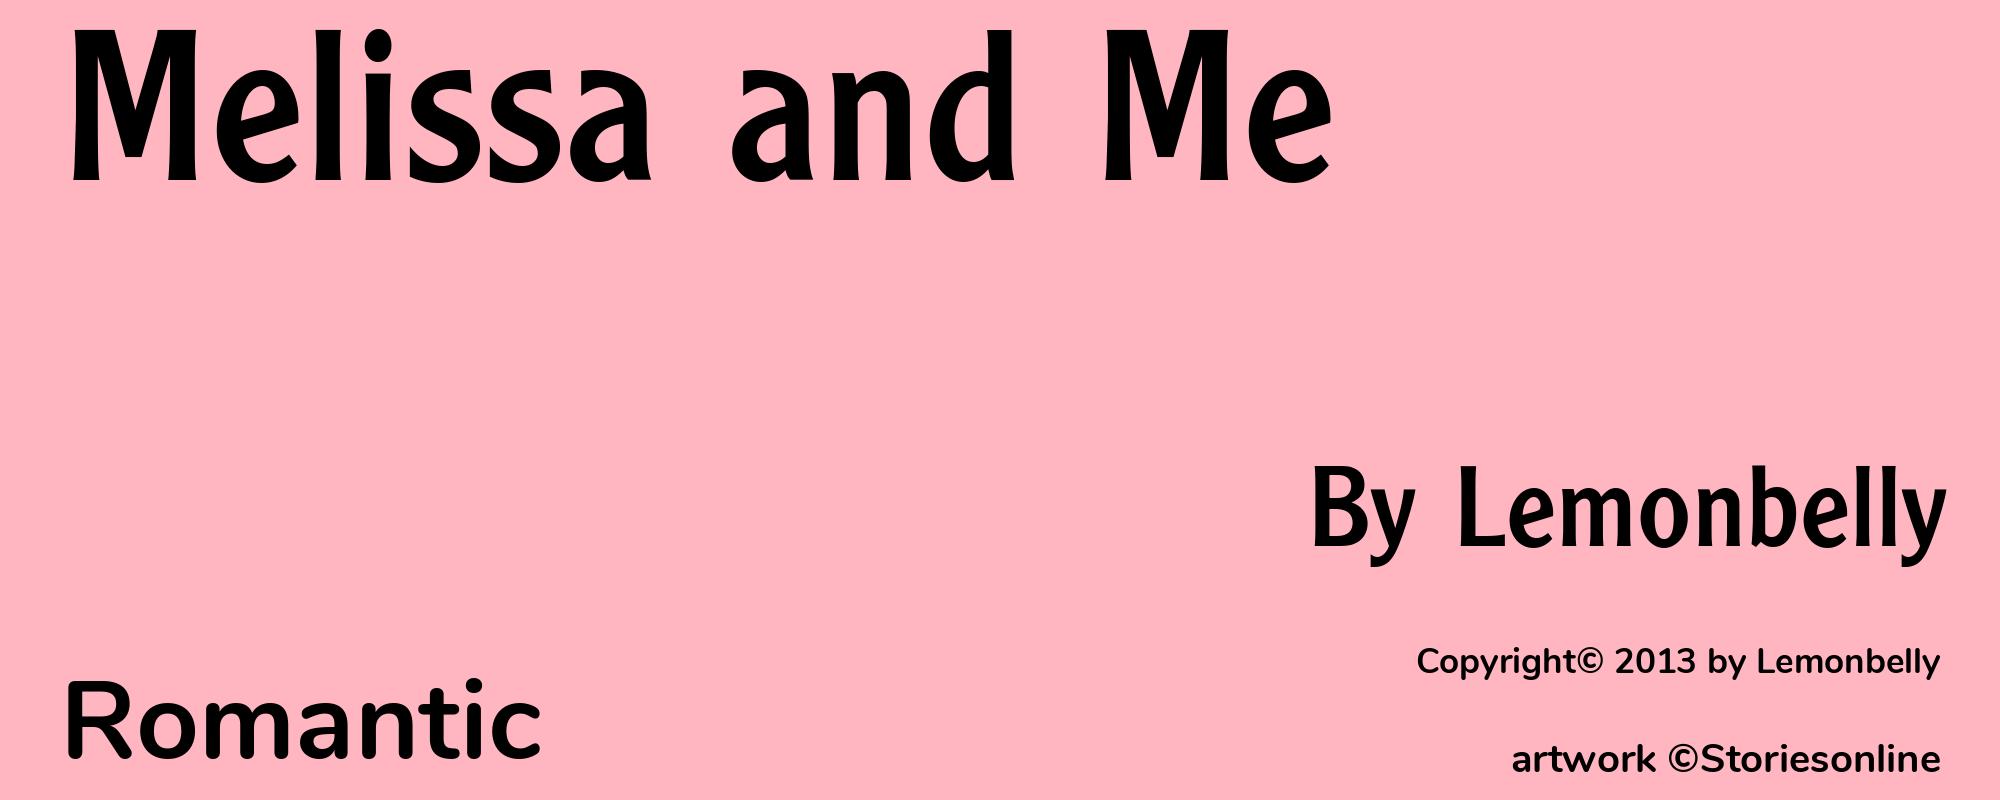 Melissa and Me - Cover